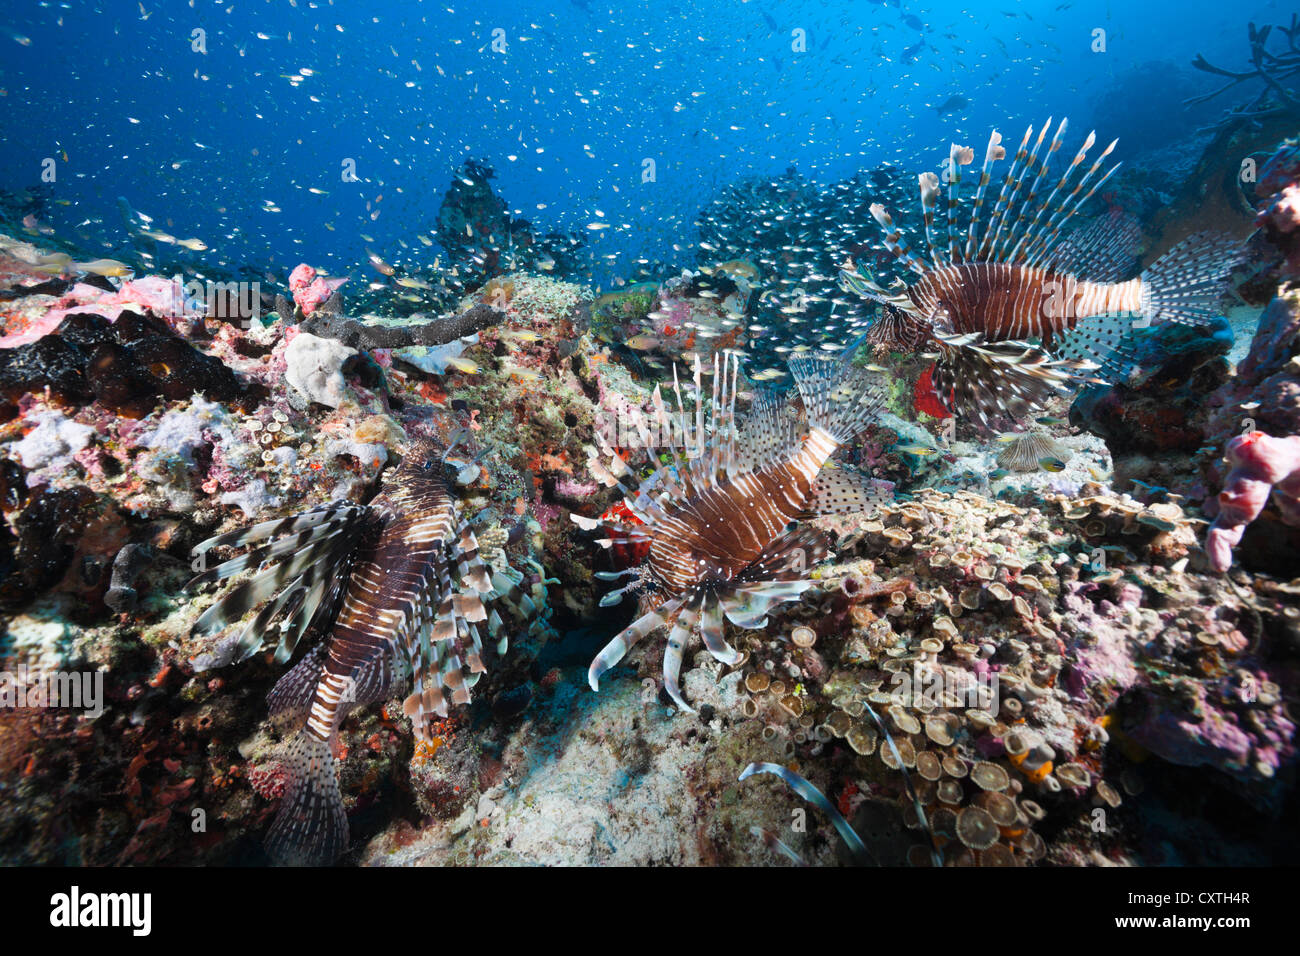 Plus Lionfishes Coral Reef, Pterois miles, North Male Atoll, Maldives Banque D'Images